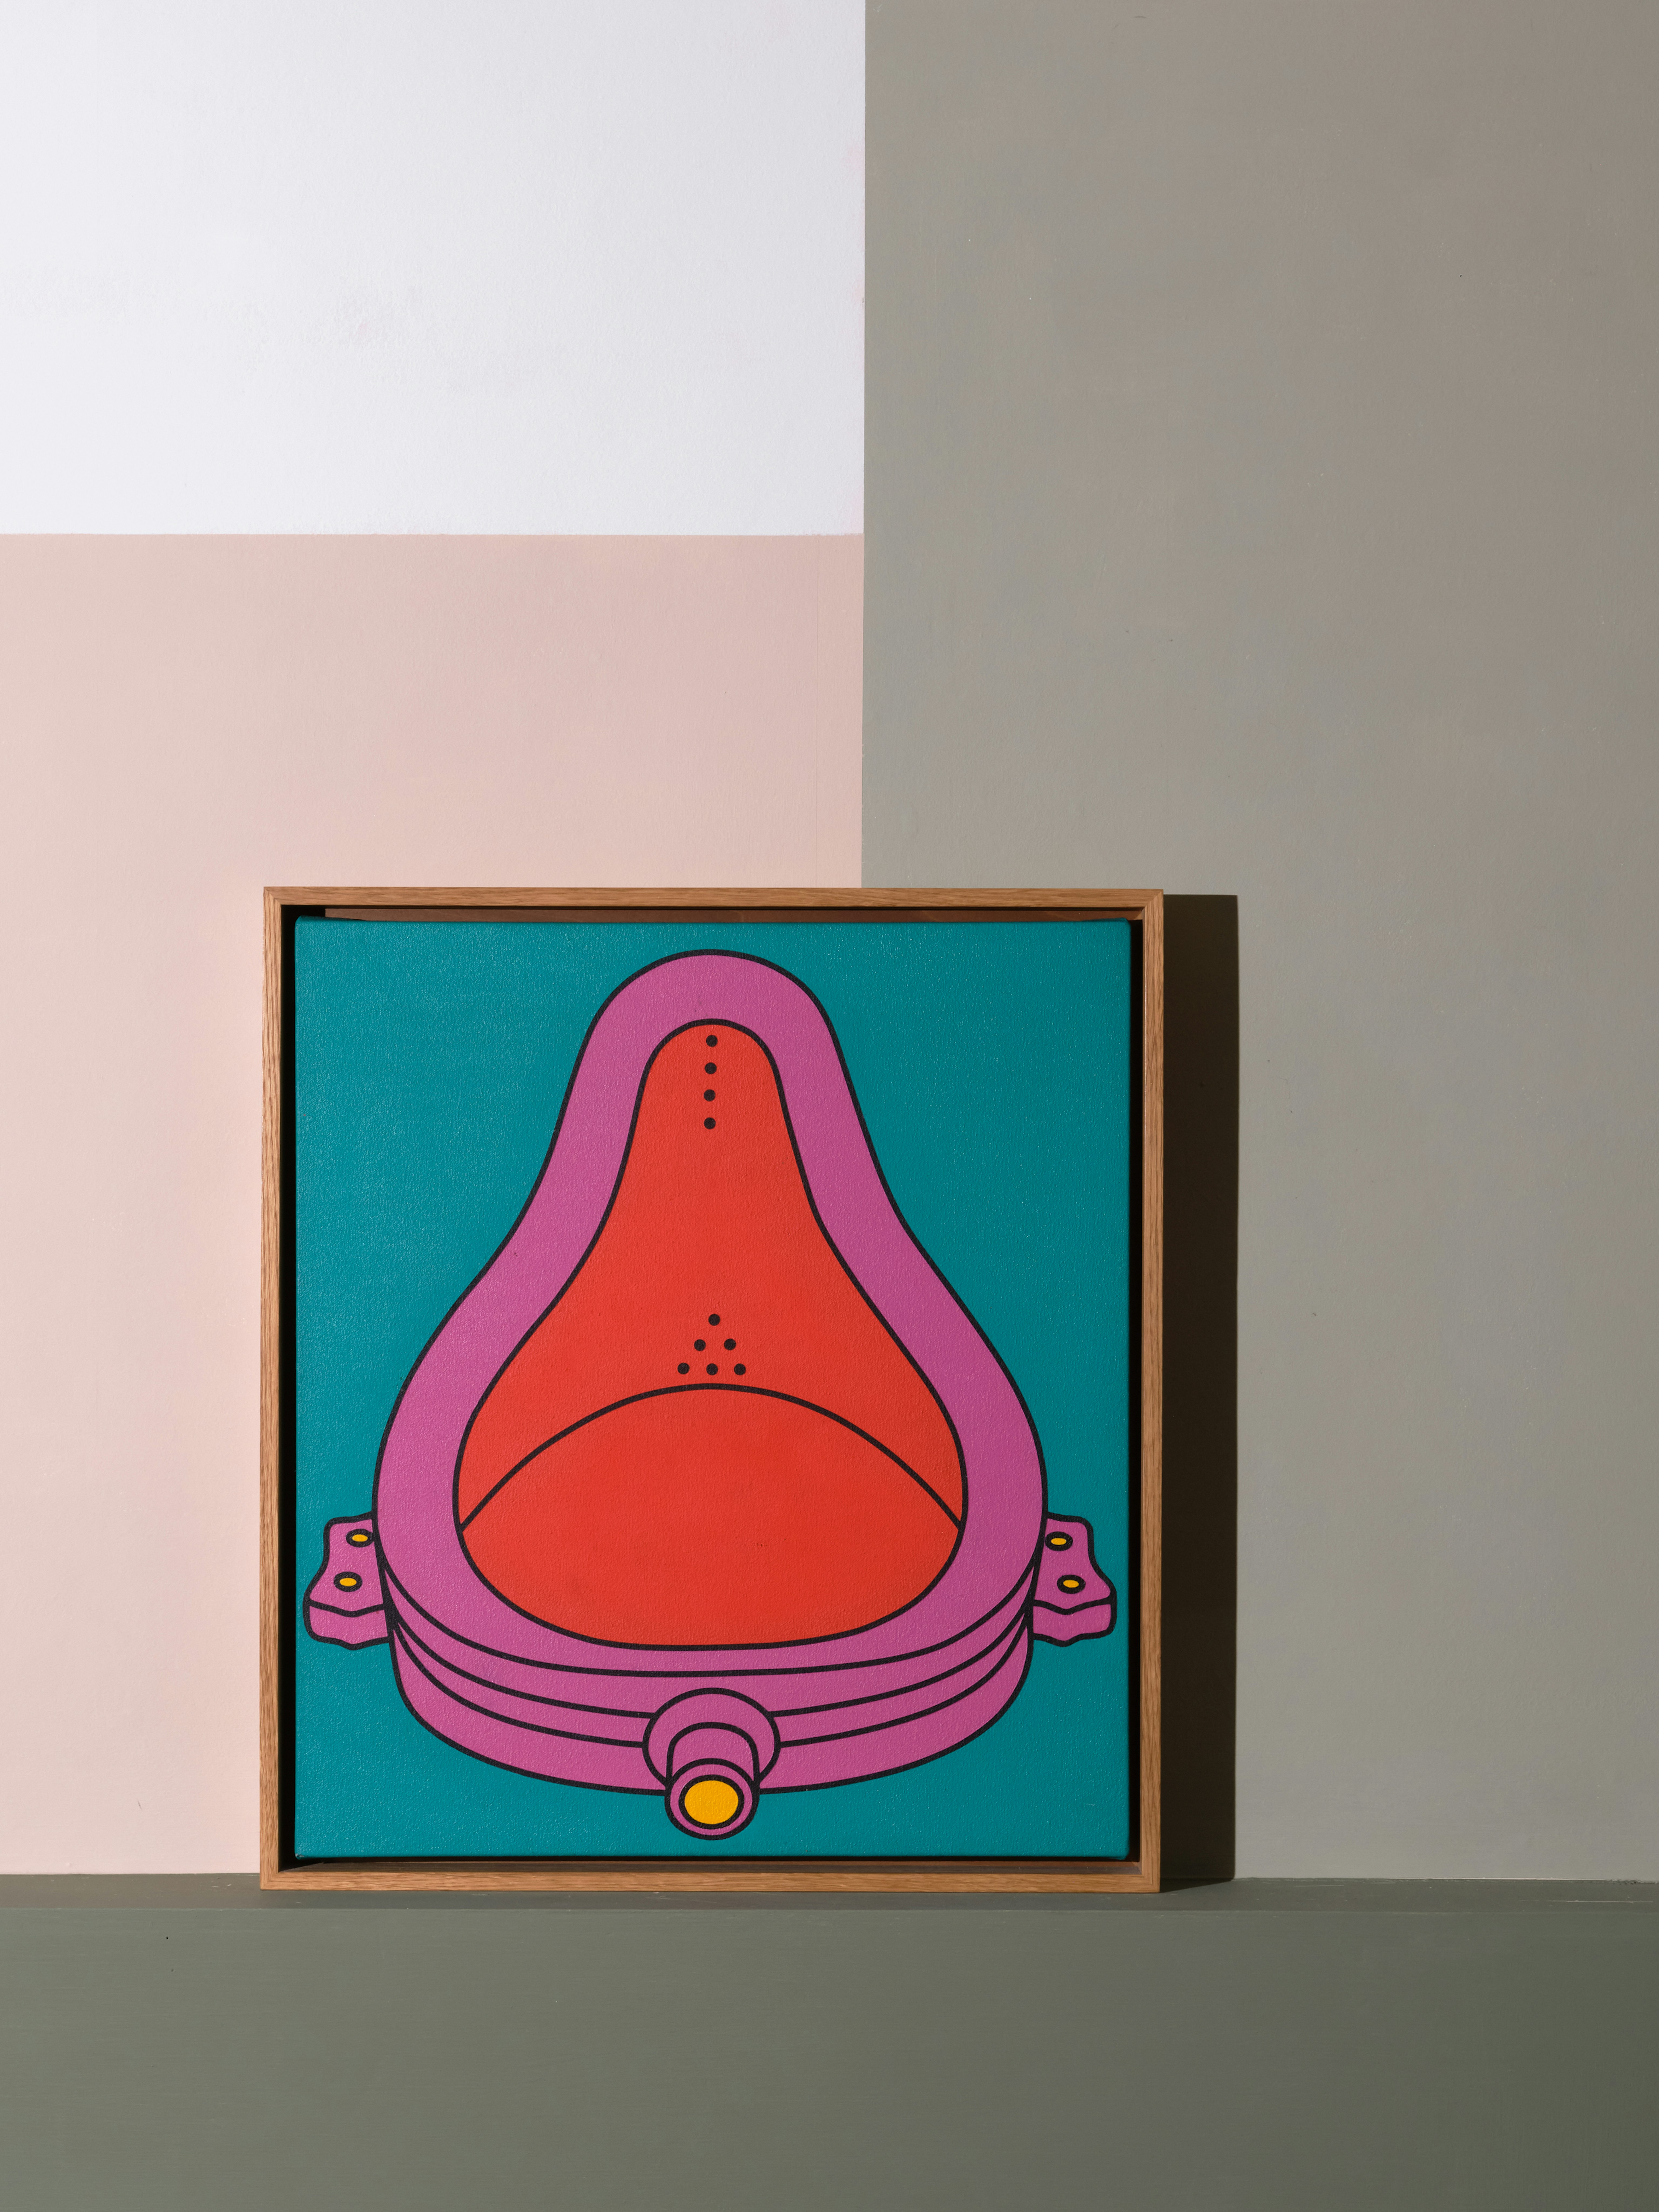 Installation photo of framed acrylic on canvas by Michael Craig-Martin depicting a pop coloured urinal in pink, red and yellow on contrasting turquoise green background.